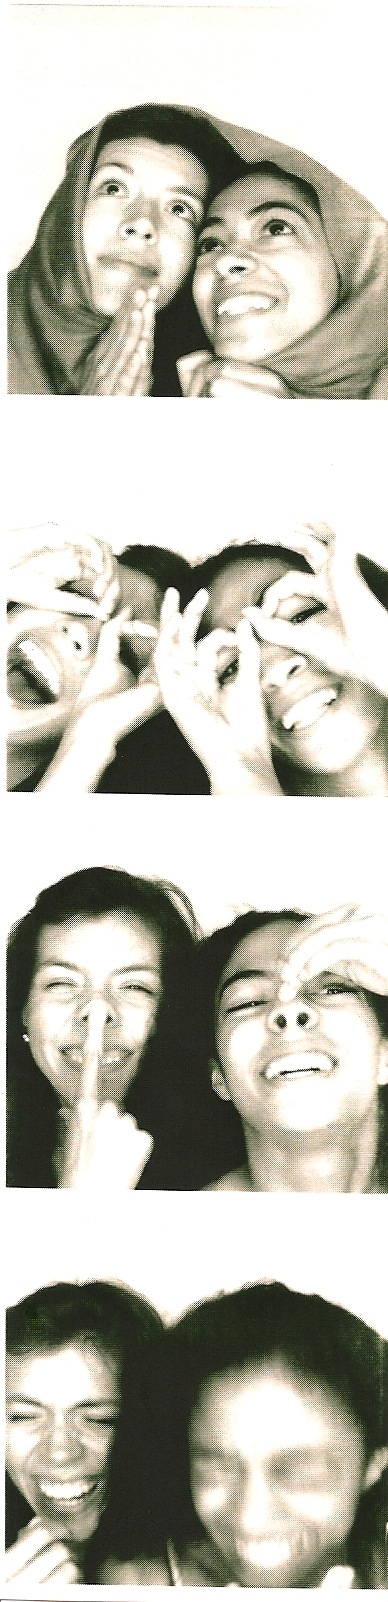 There was an actual photobooth at First Friday!